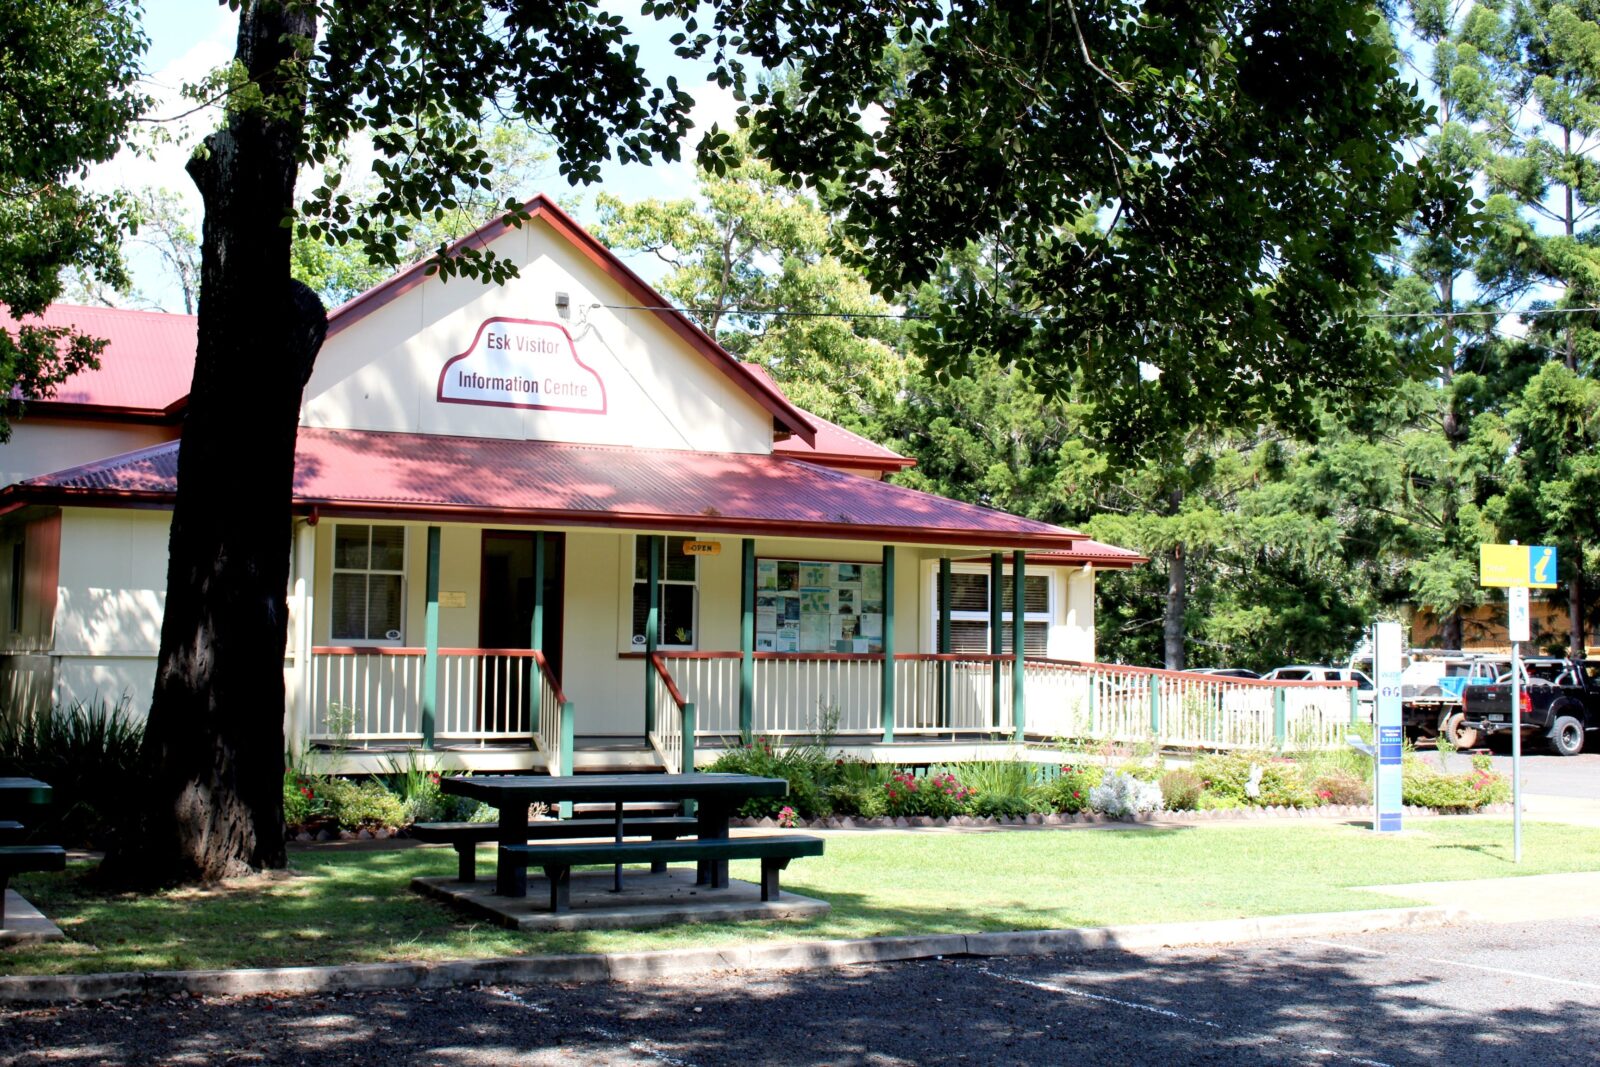 External View of the Esk Visitor Information Centre - older building with wrap verandah, trees